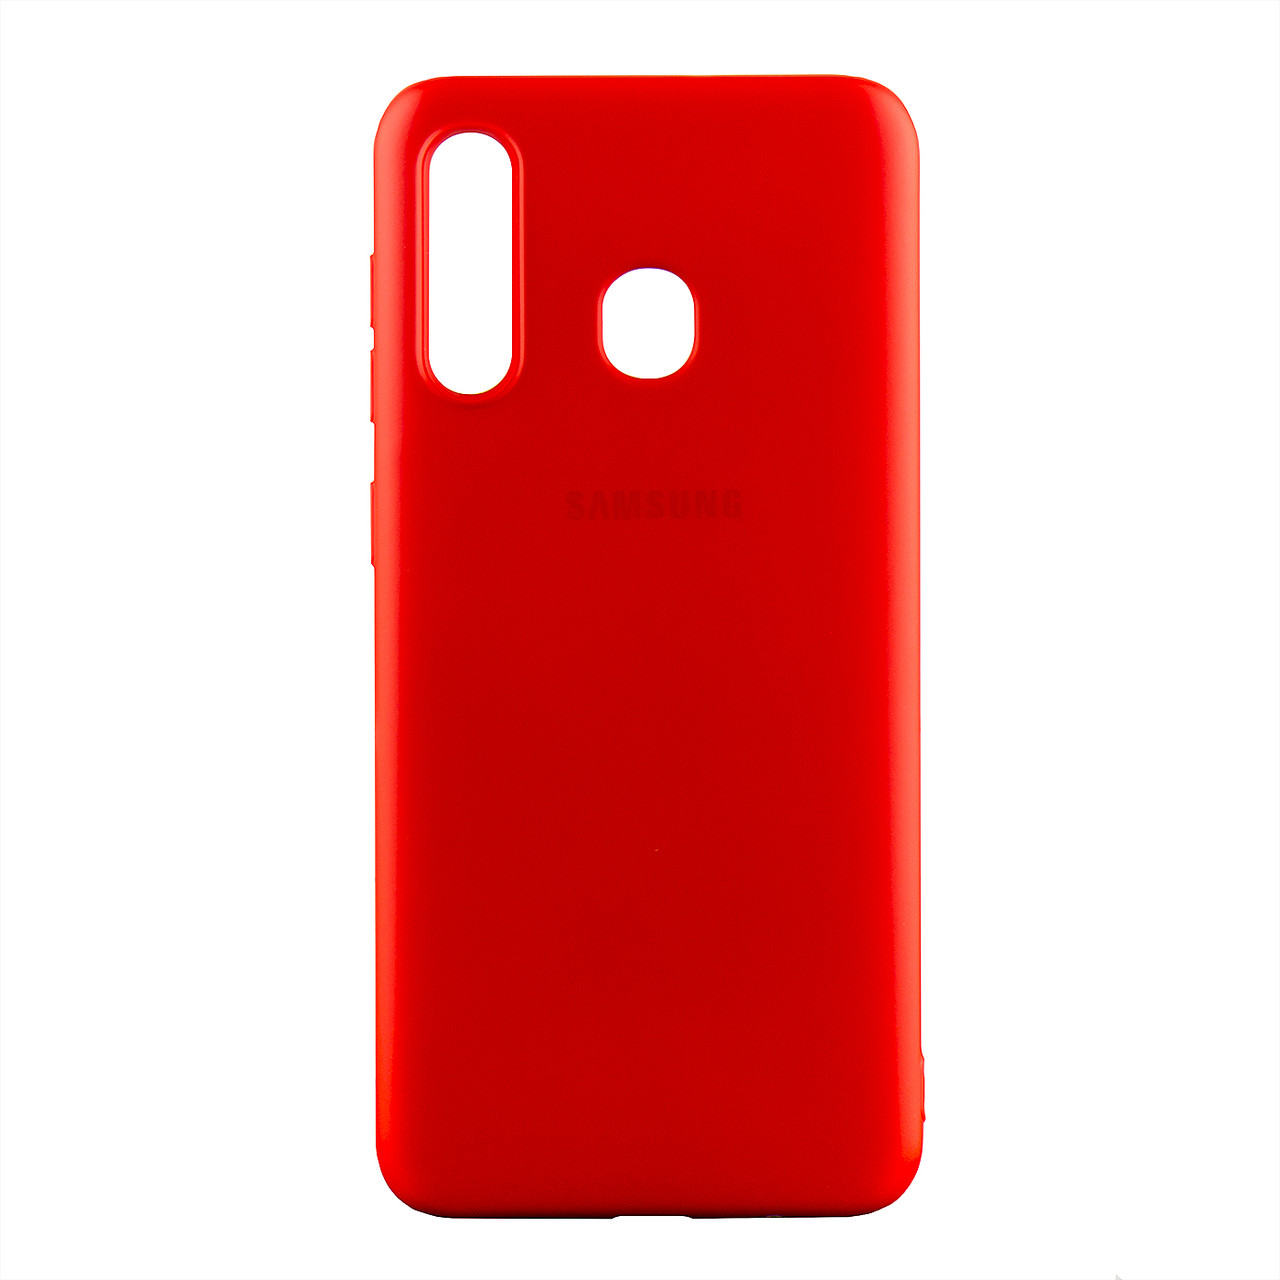 Чехол для Samsung Galaxy A20/A30 back cover Silky and soft-touch Silicone Cover Red